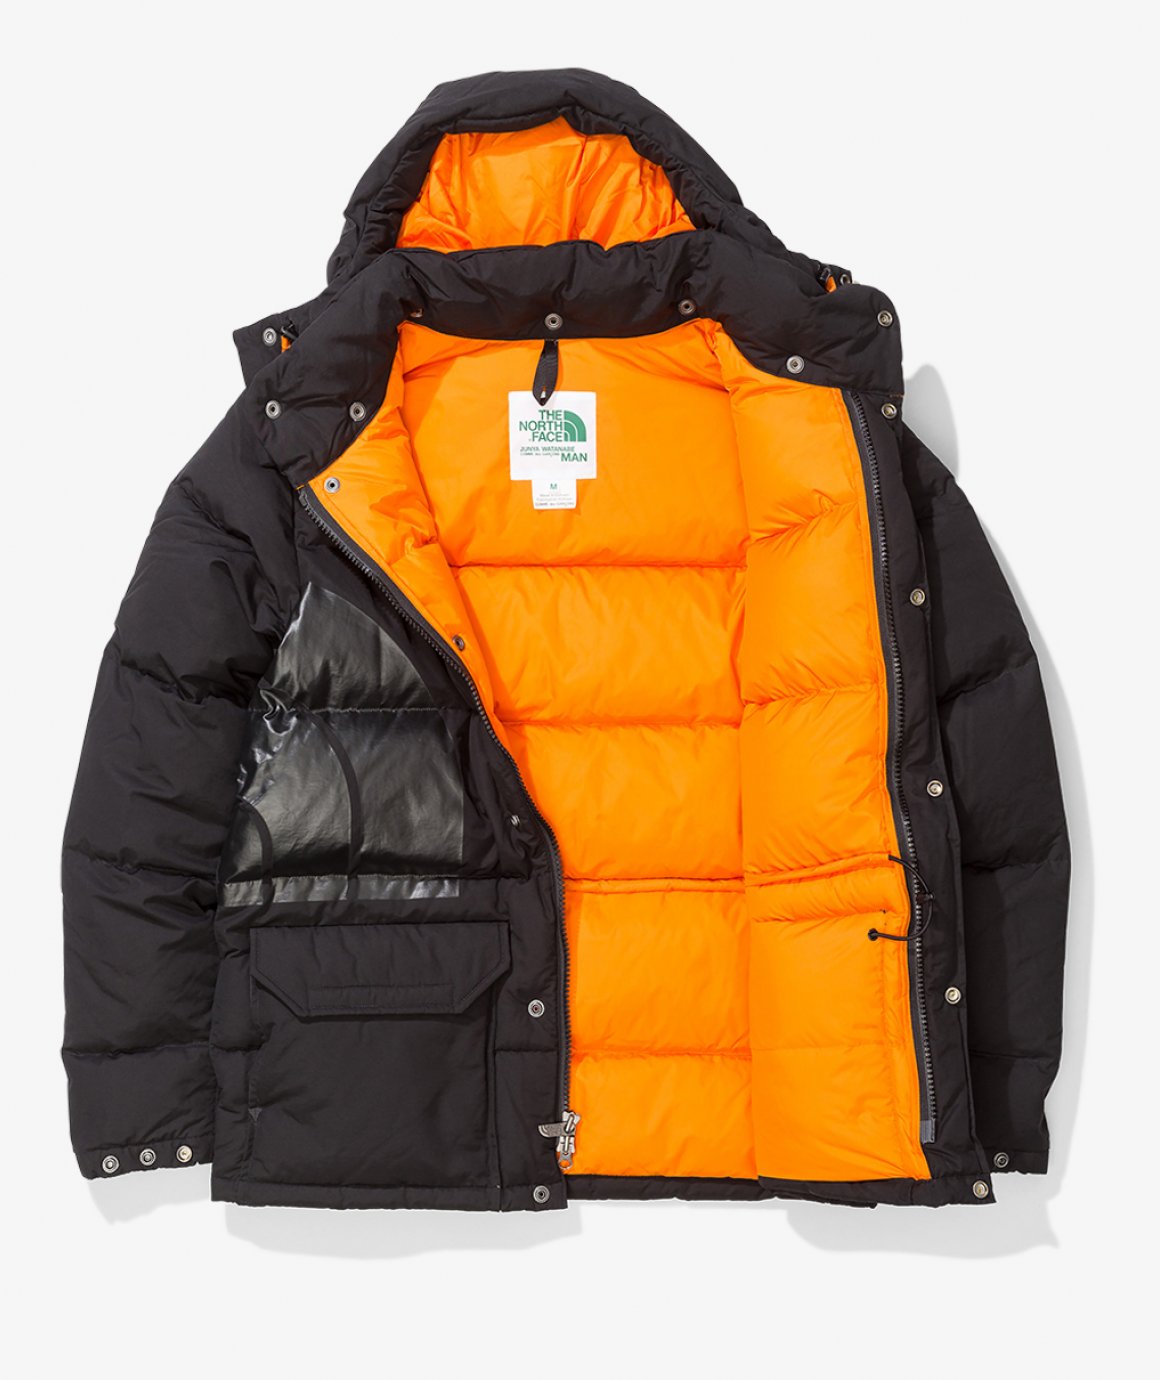 Junya Watanabe MAN and The North Face brings back an iconic puffer 